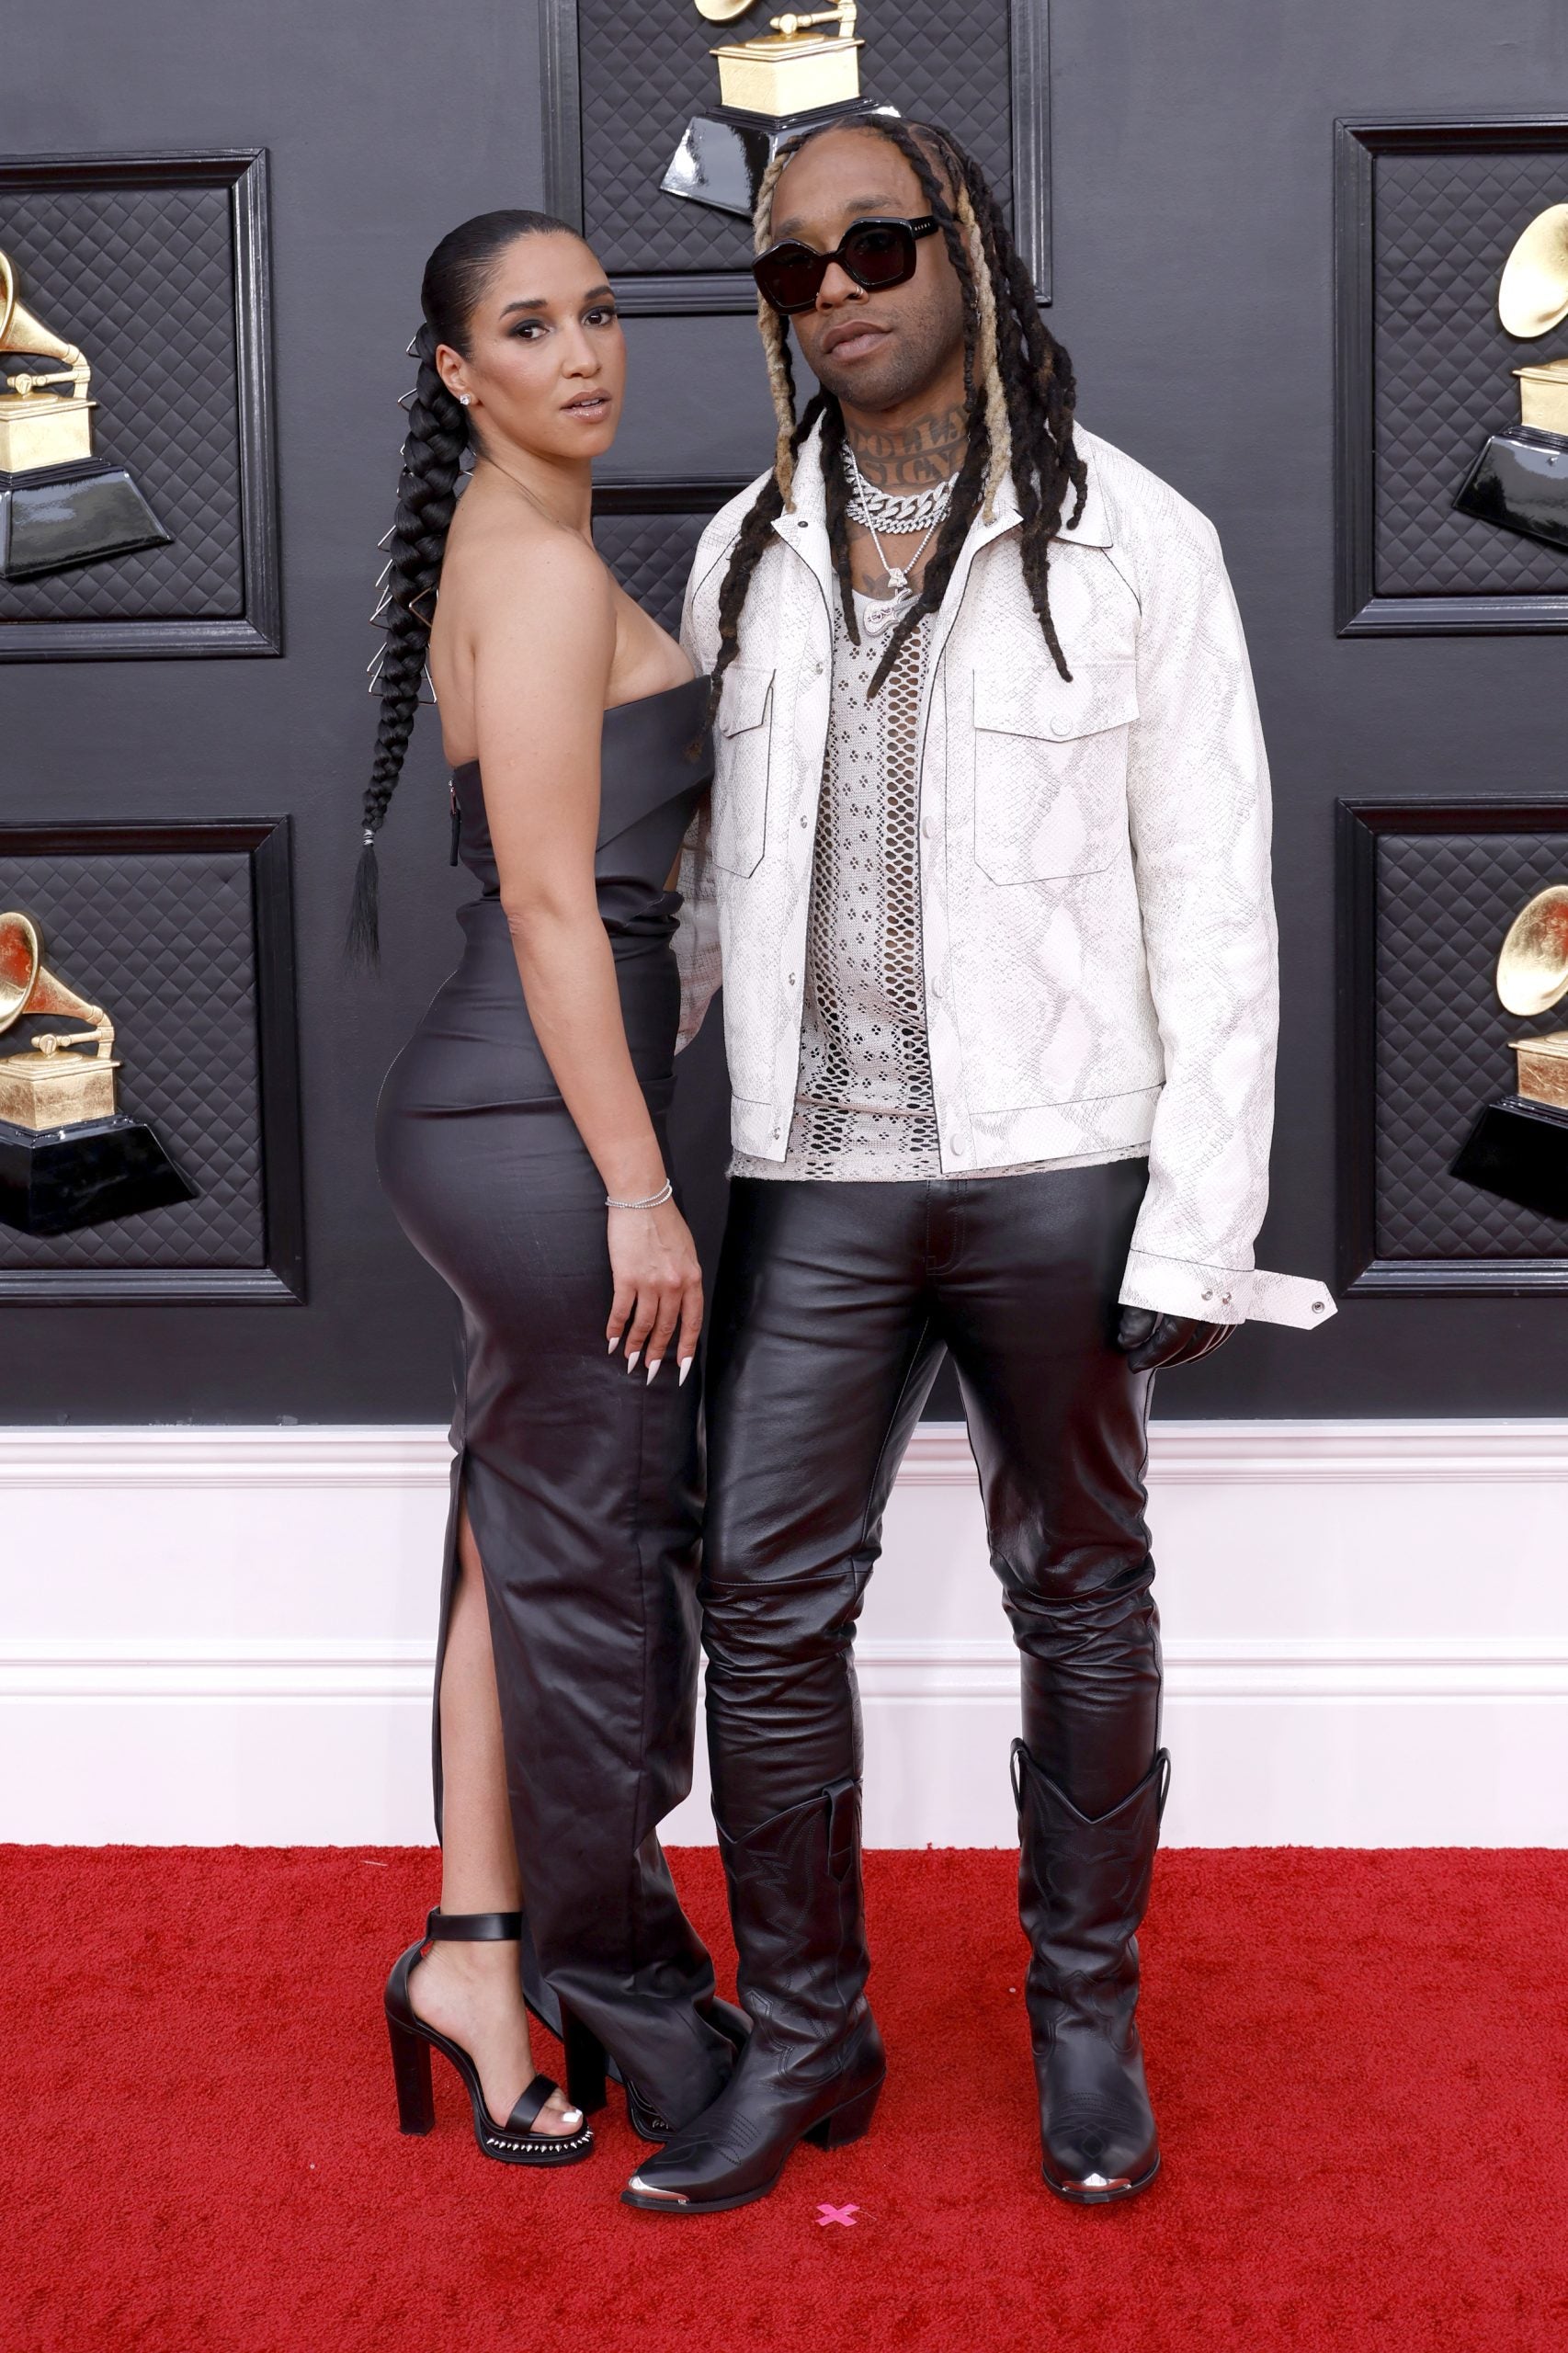 Check Out The Couples Who Looked Very Much In Love At The 2022 Grammys ...